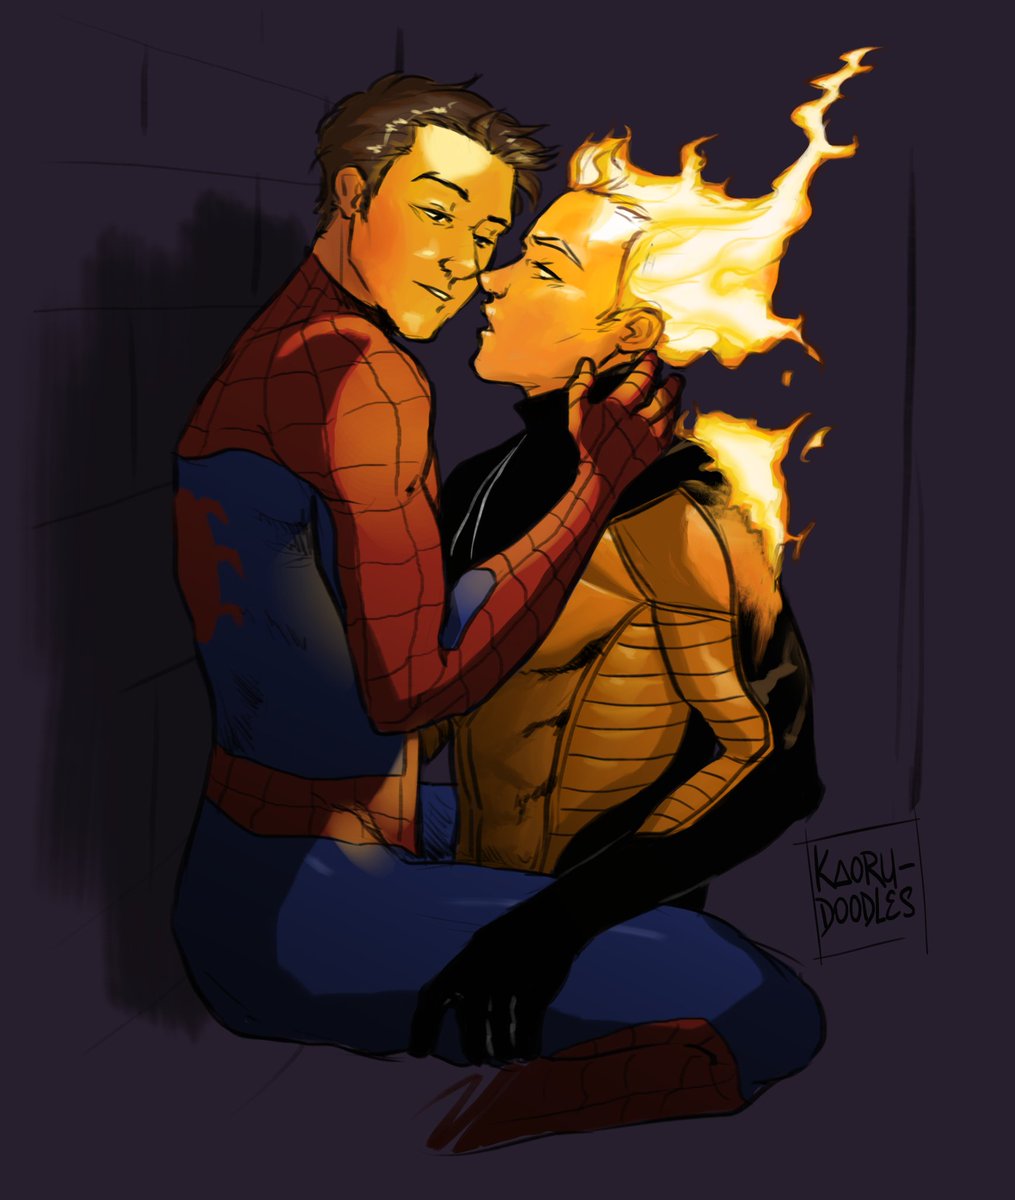 Heated moments with #spiderman and the #thehumantorch 🔥🕷️

#spideytorch #johnnystorm #peterparker #kaorudoodles